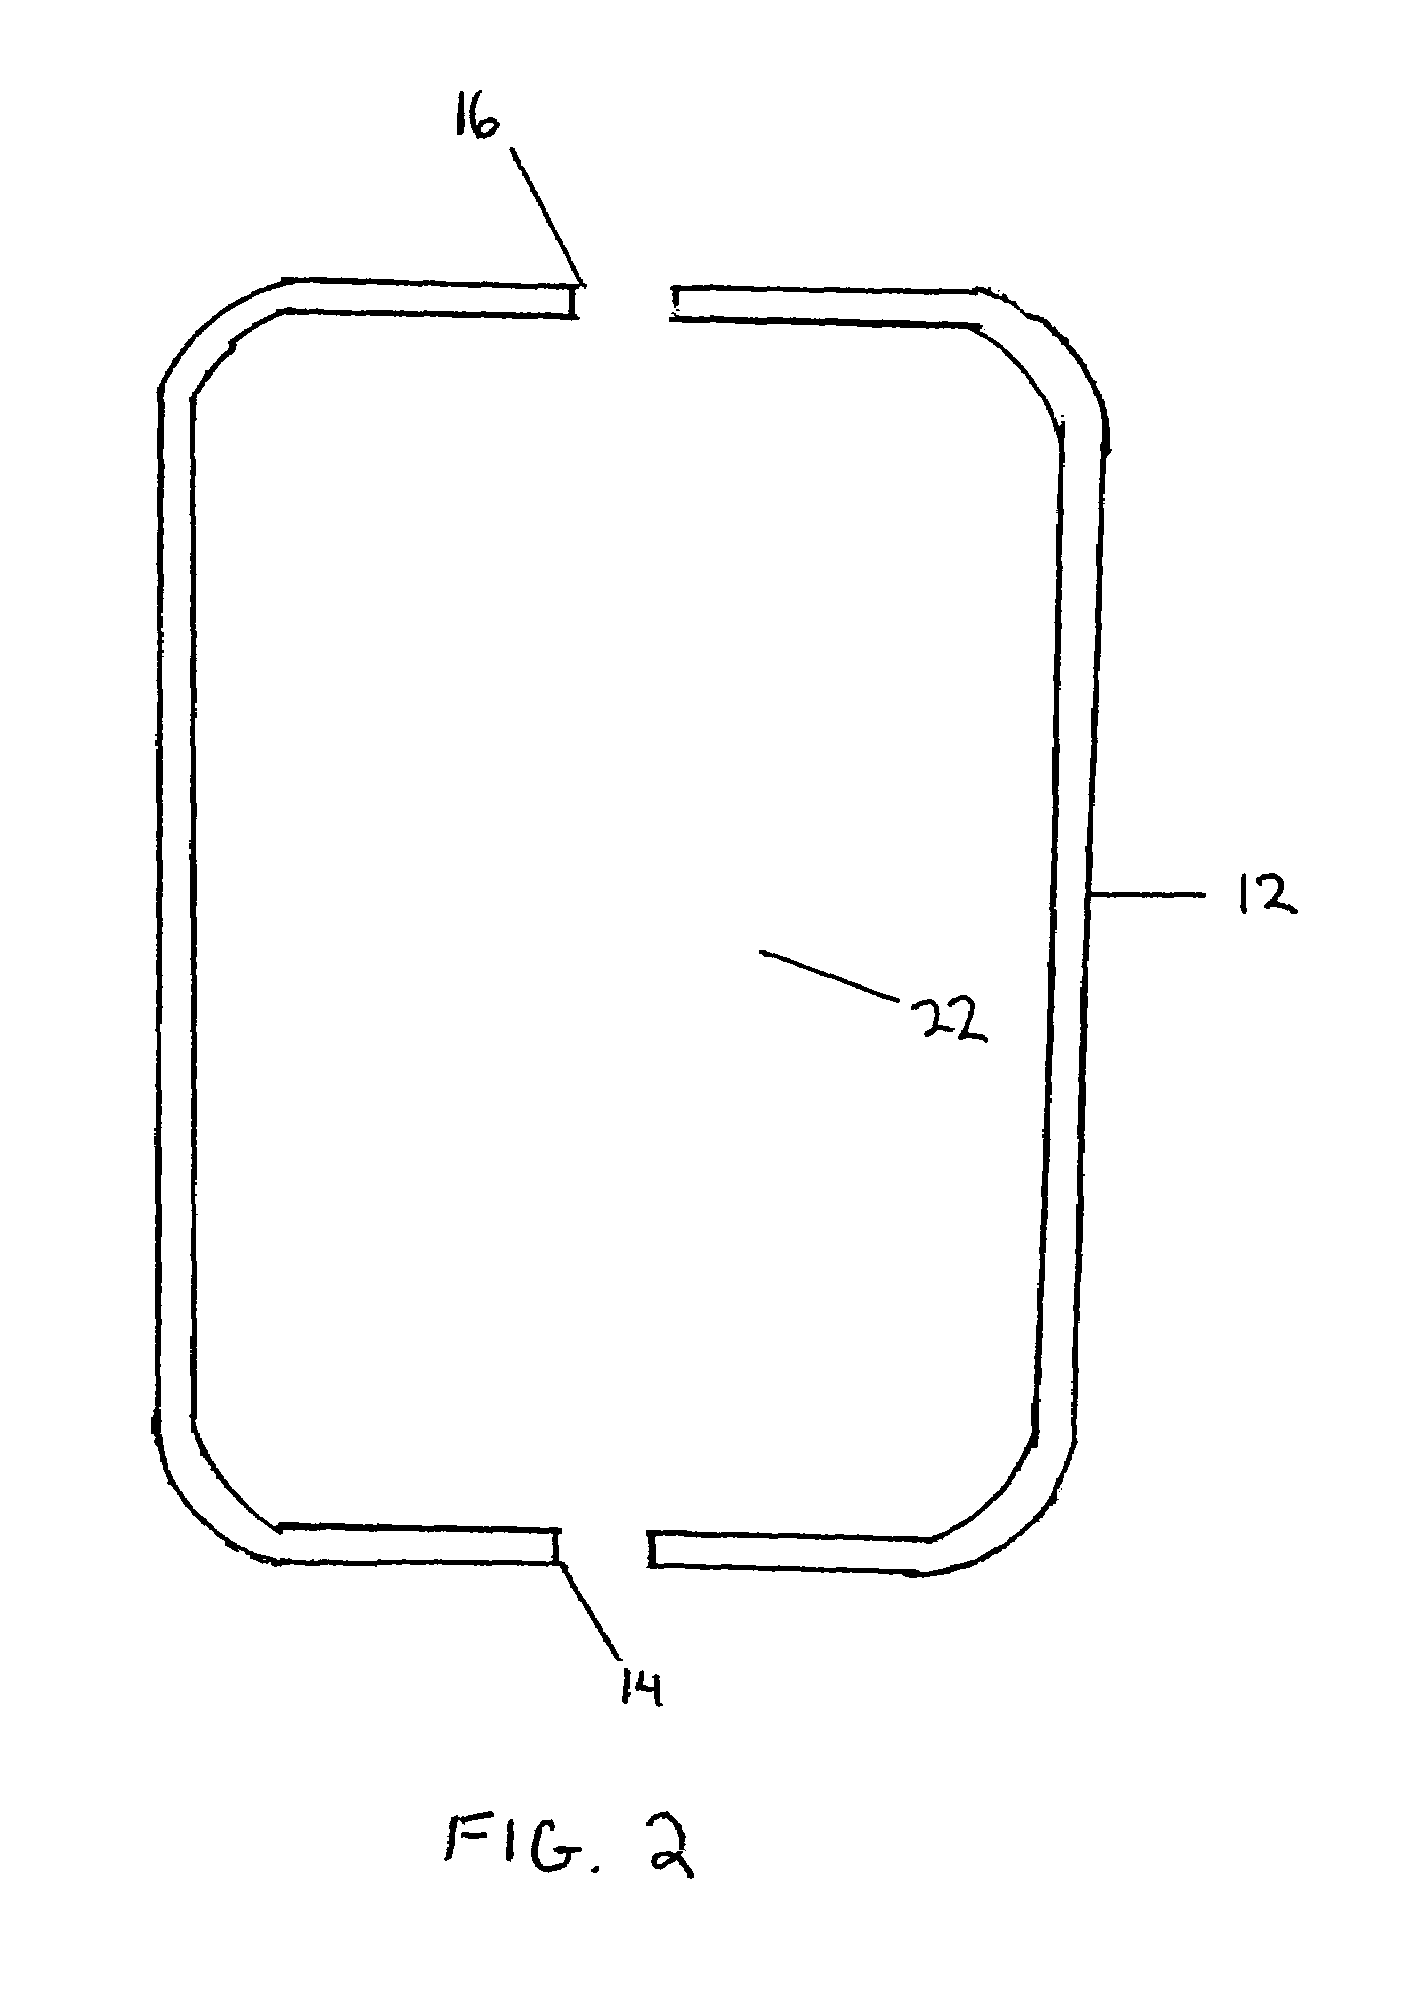 In-situ BWR and PWR CRUD flake analysis method and tool